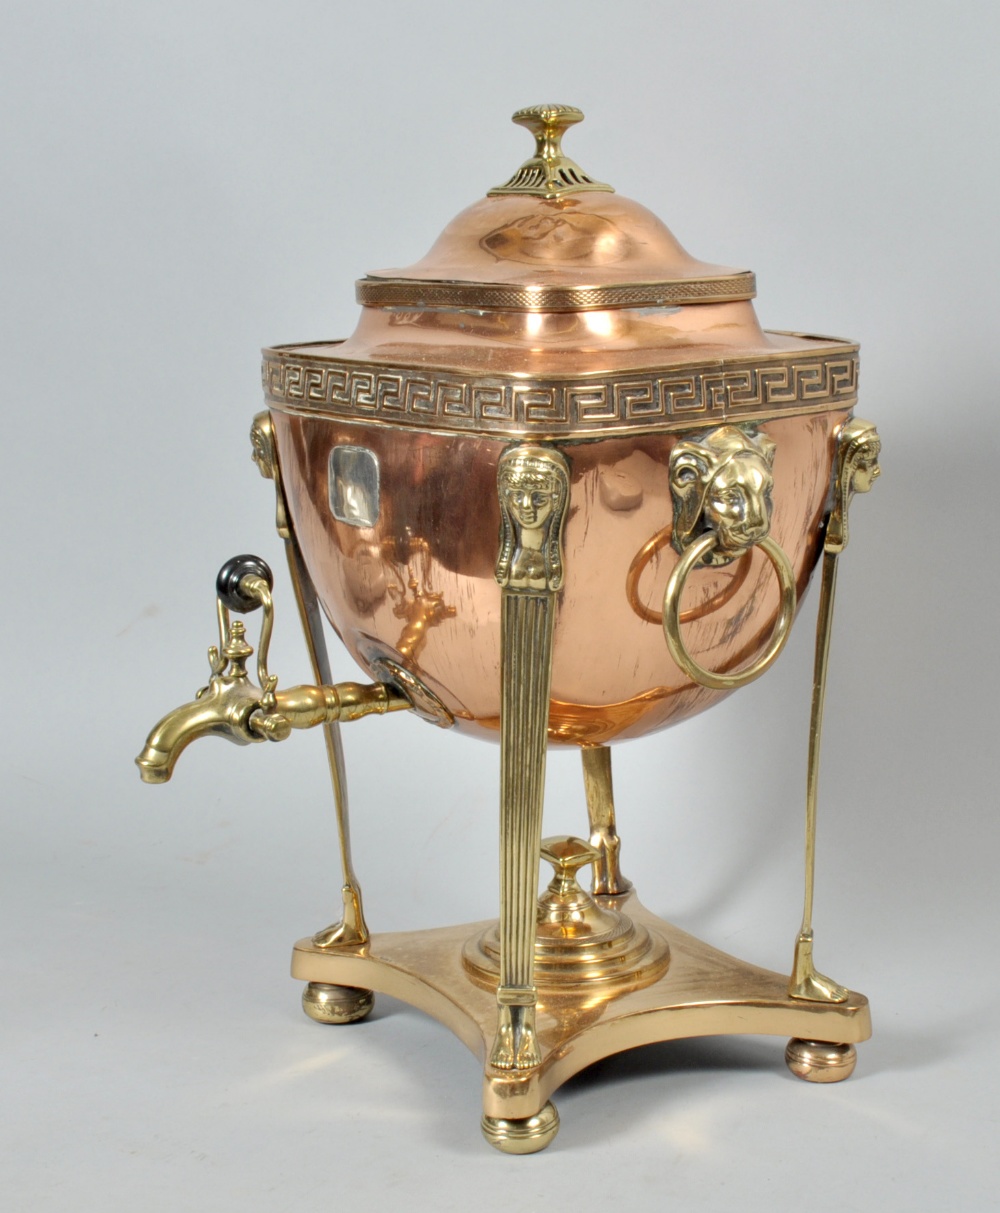 A Regency copper and brass samovar with lion mask ring pull handles and Egyptianesque supports,